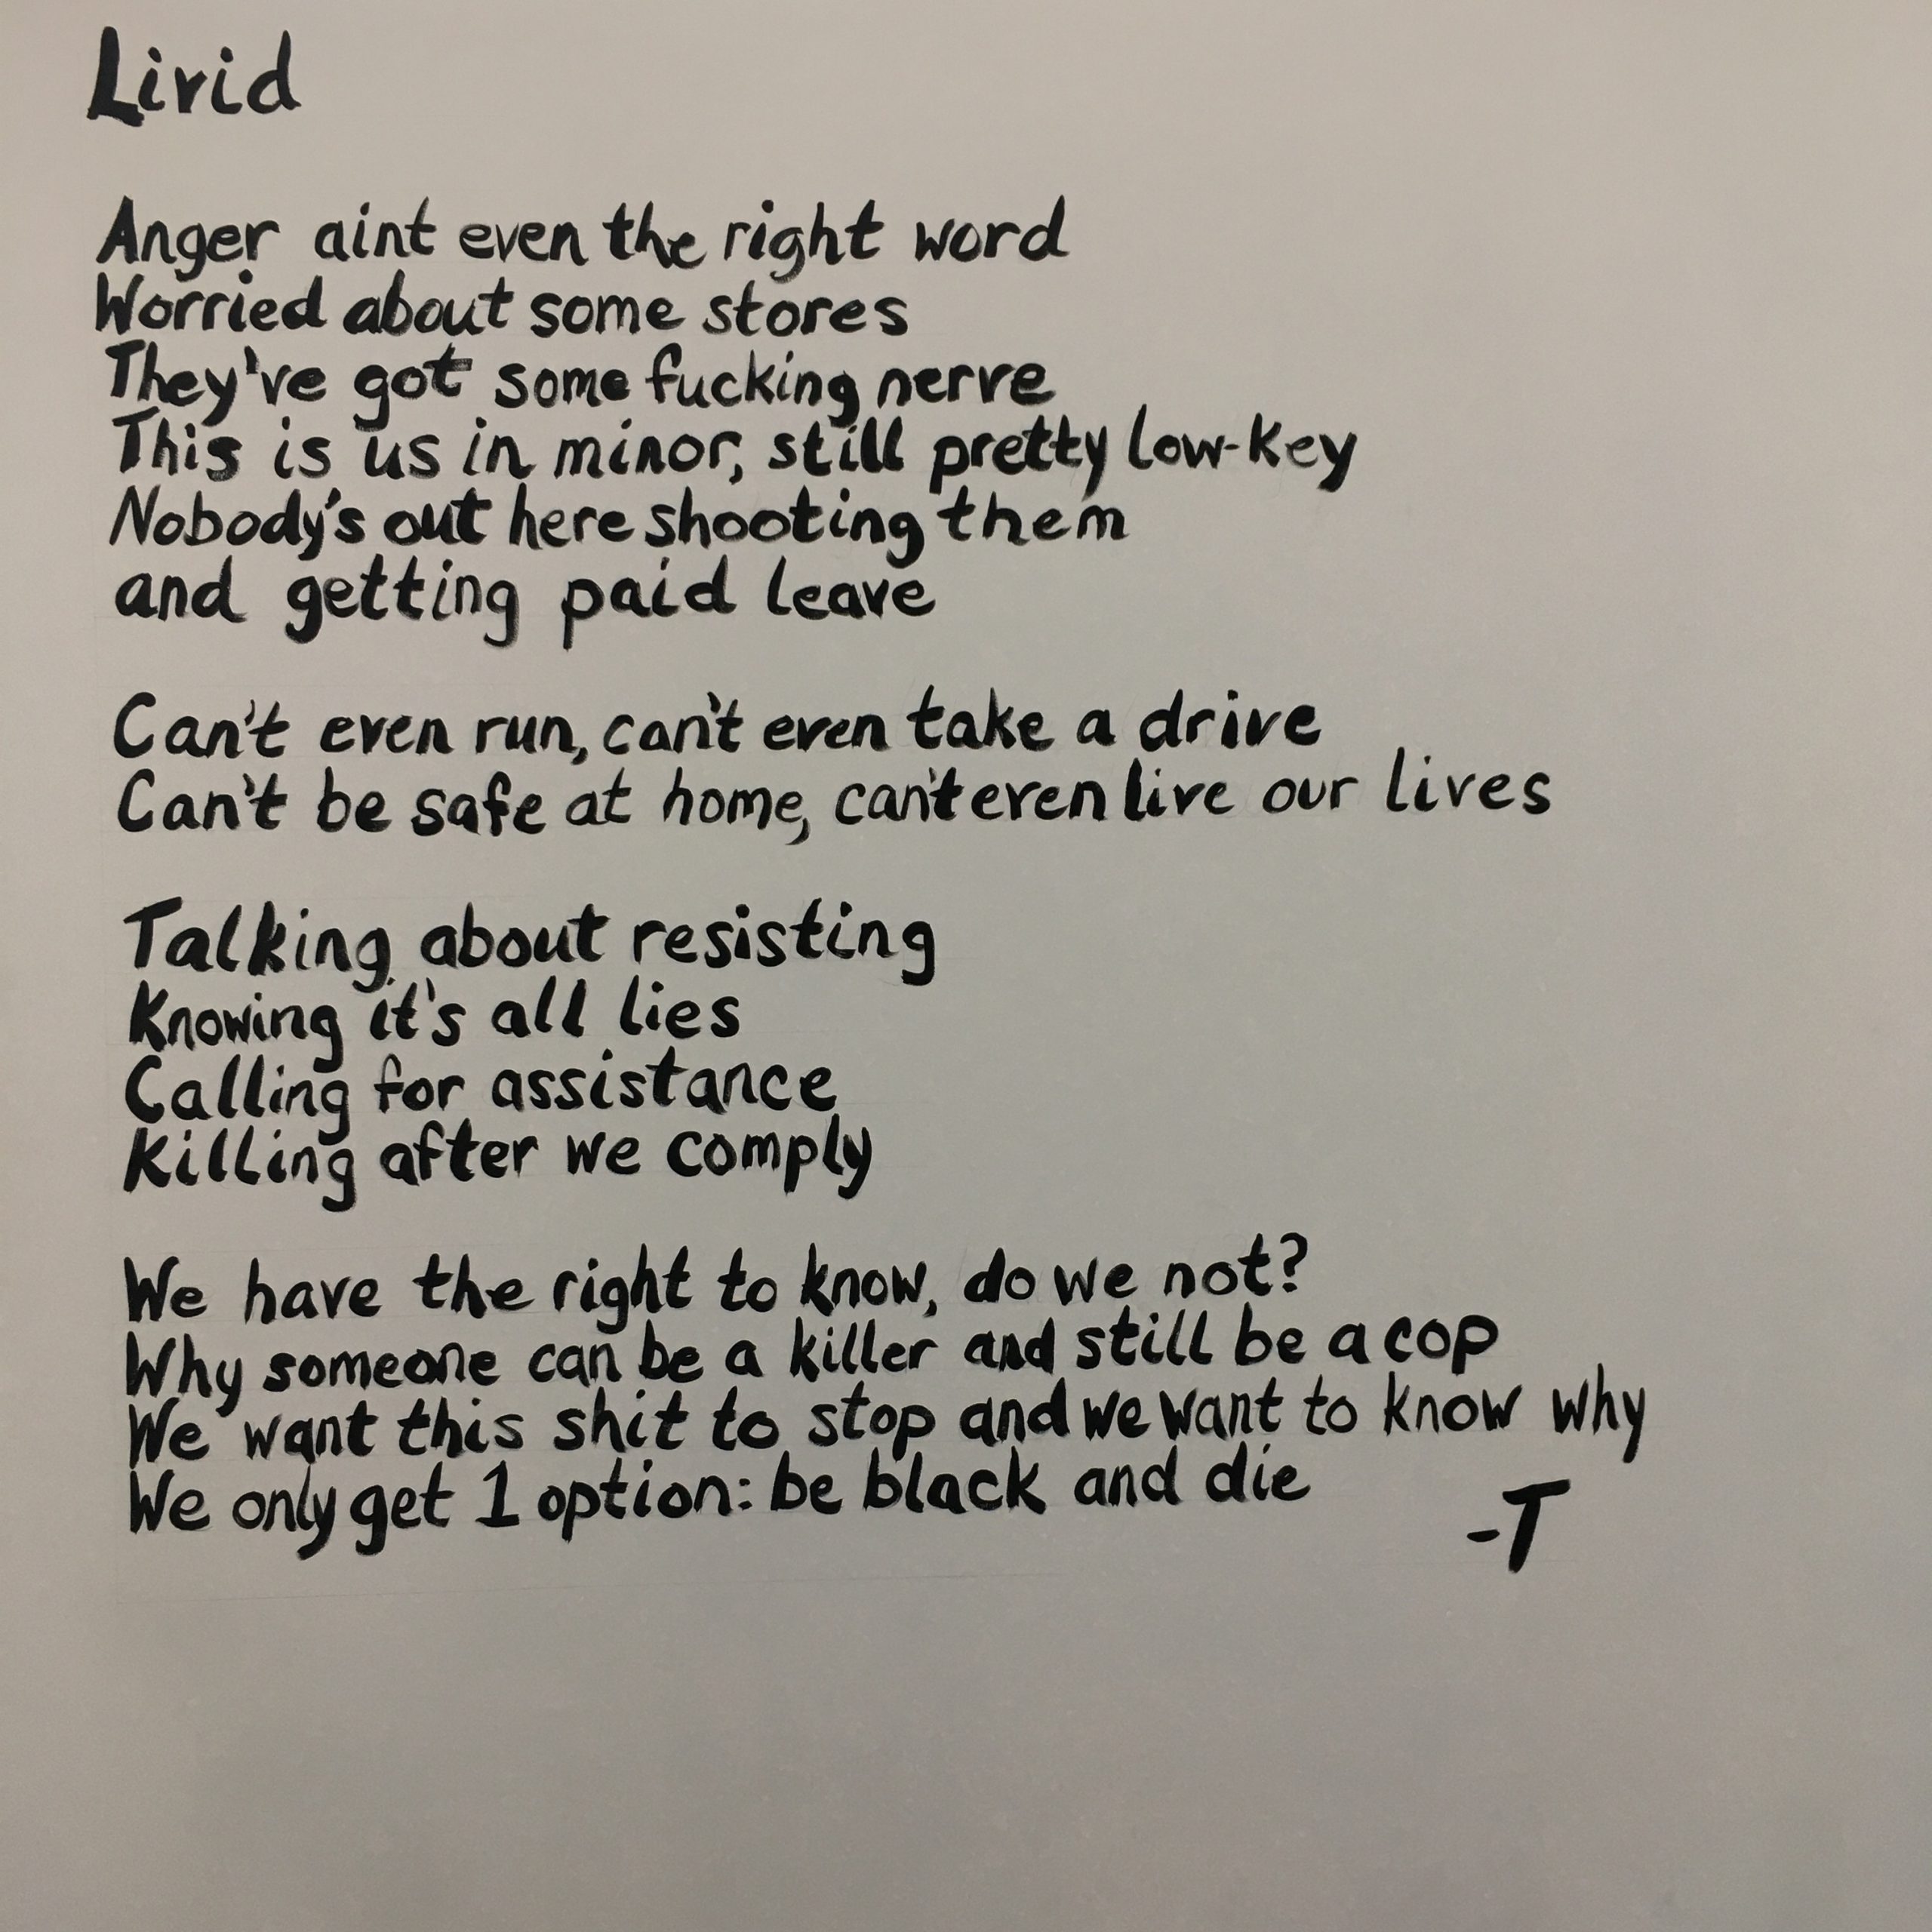 image of the poem